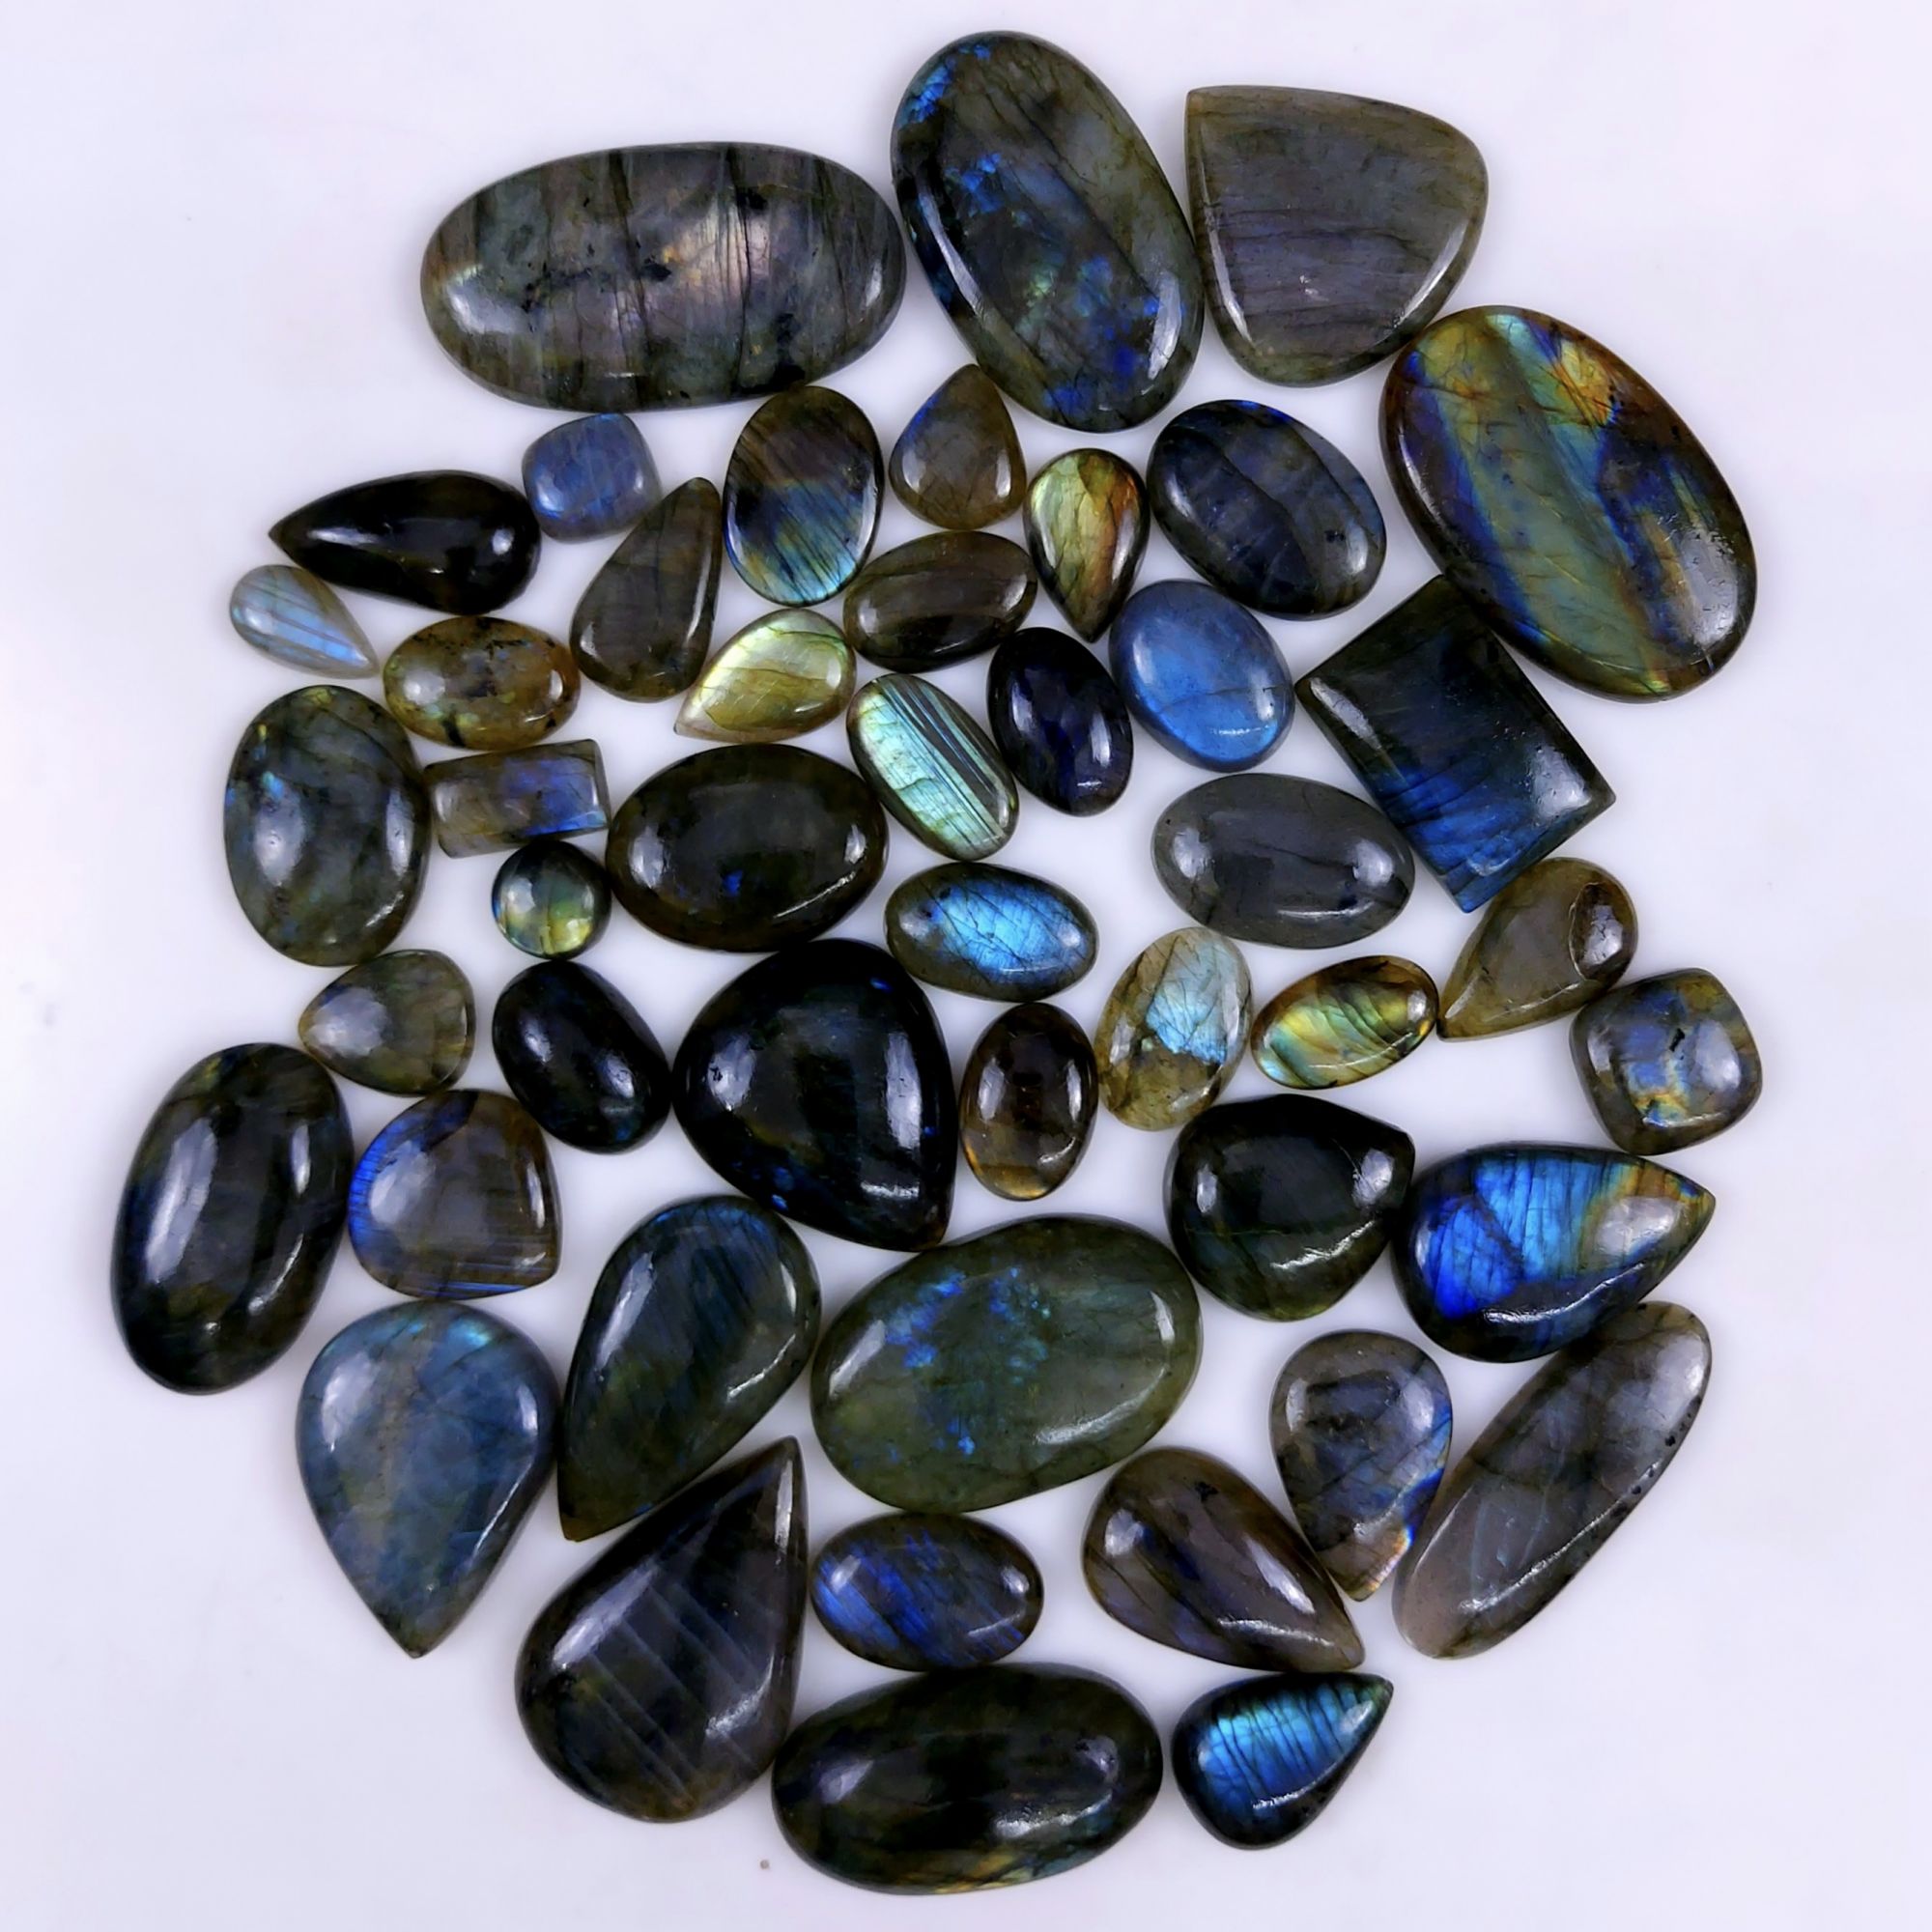 47pc 1453Cts Labradorite Cabochon Multifire Healing Crystal For Jewelry Supplies, Labradorite Necklace Handmade Wire Wrapped Gemstone Pendant 50x30 12x12mm#6302